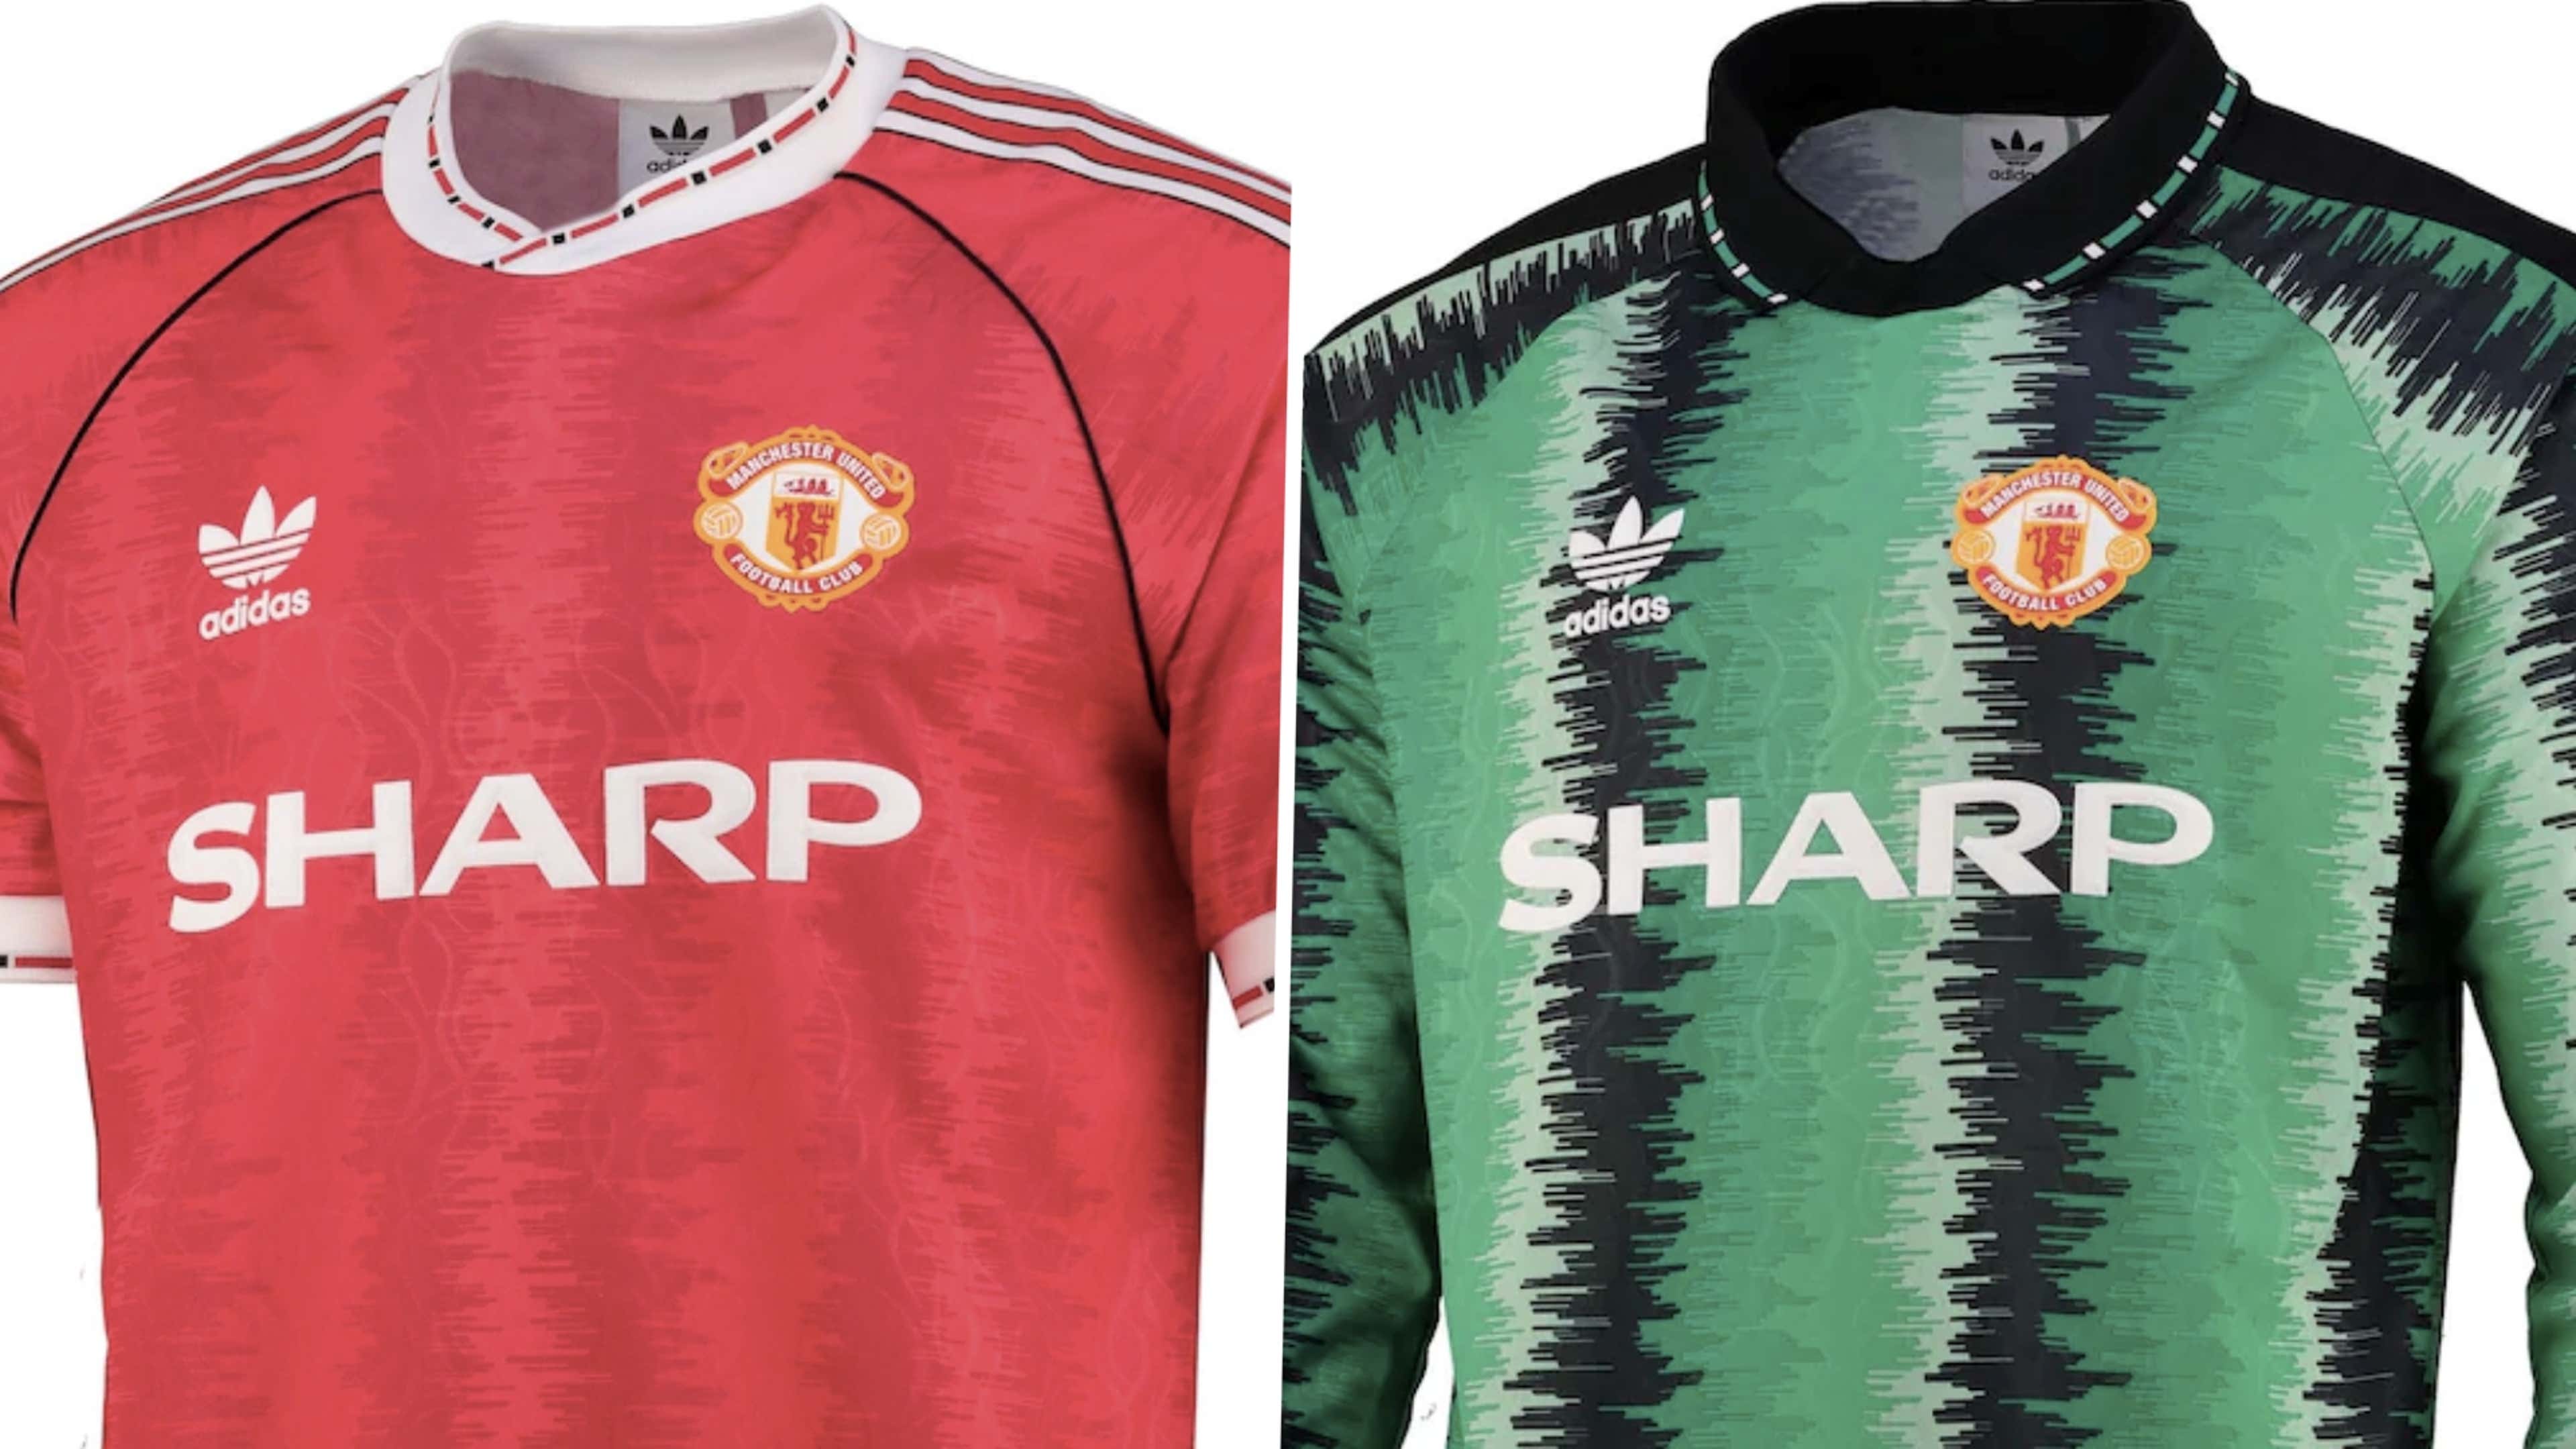 Manchester United Online Store, Official Man United Clothing